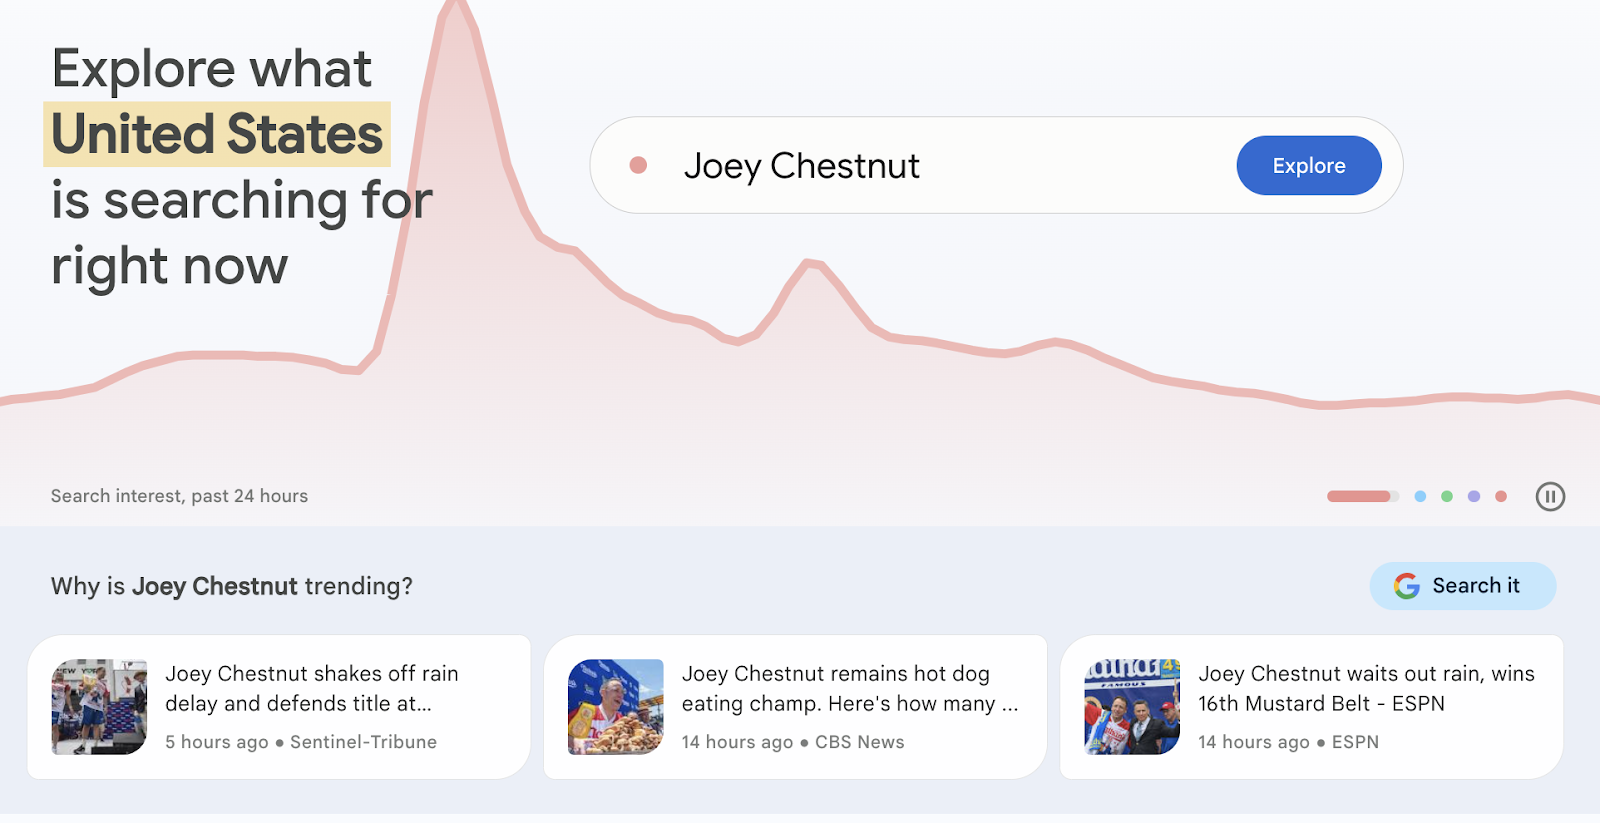 Google Trends landing page with "Joey Chestnut" search featured